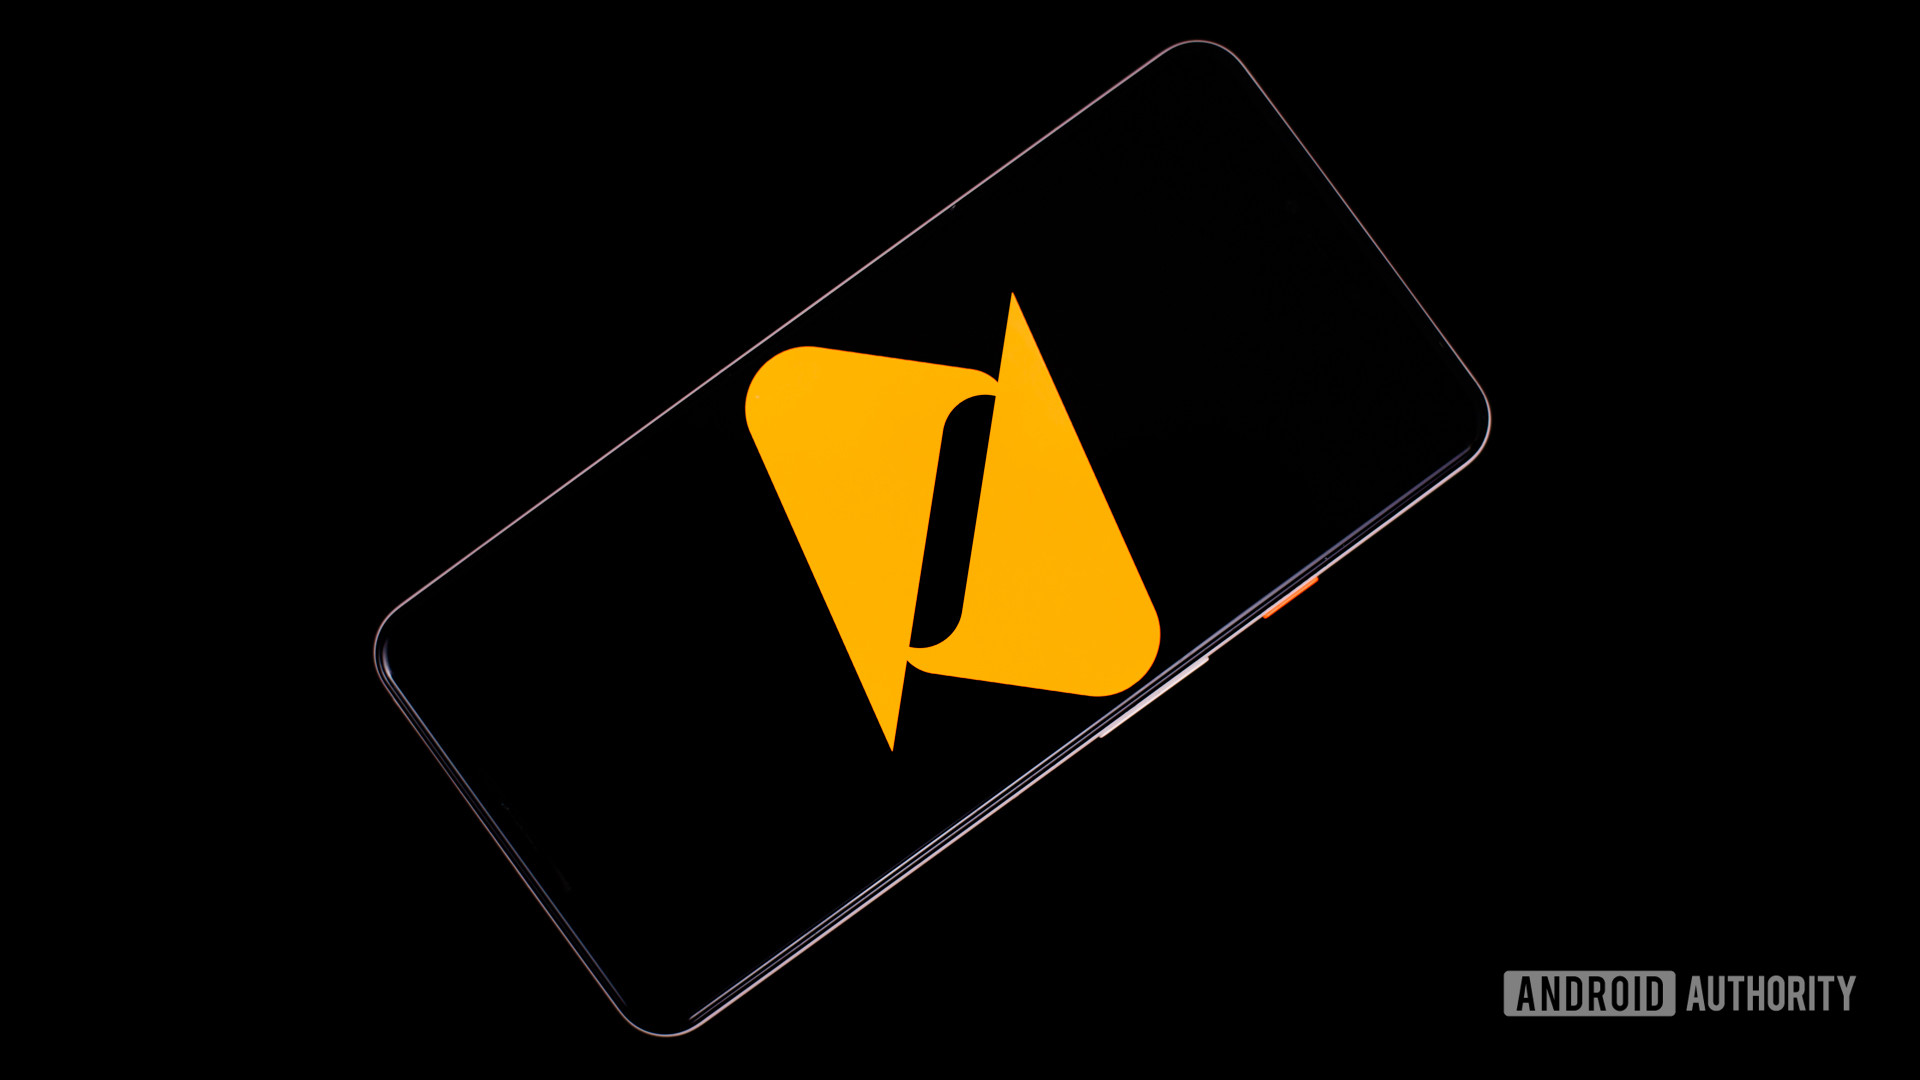 Boost Mobile logo on a mobile phone displayed on a black background.